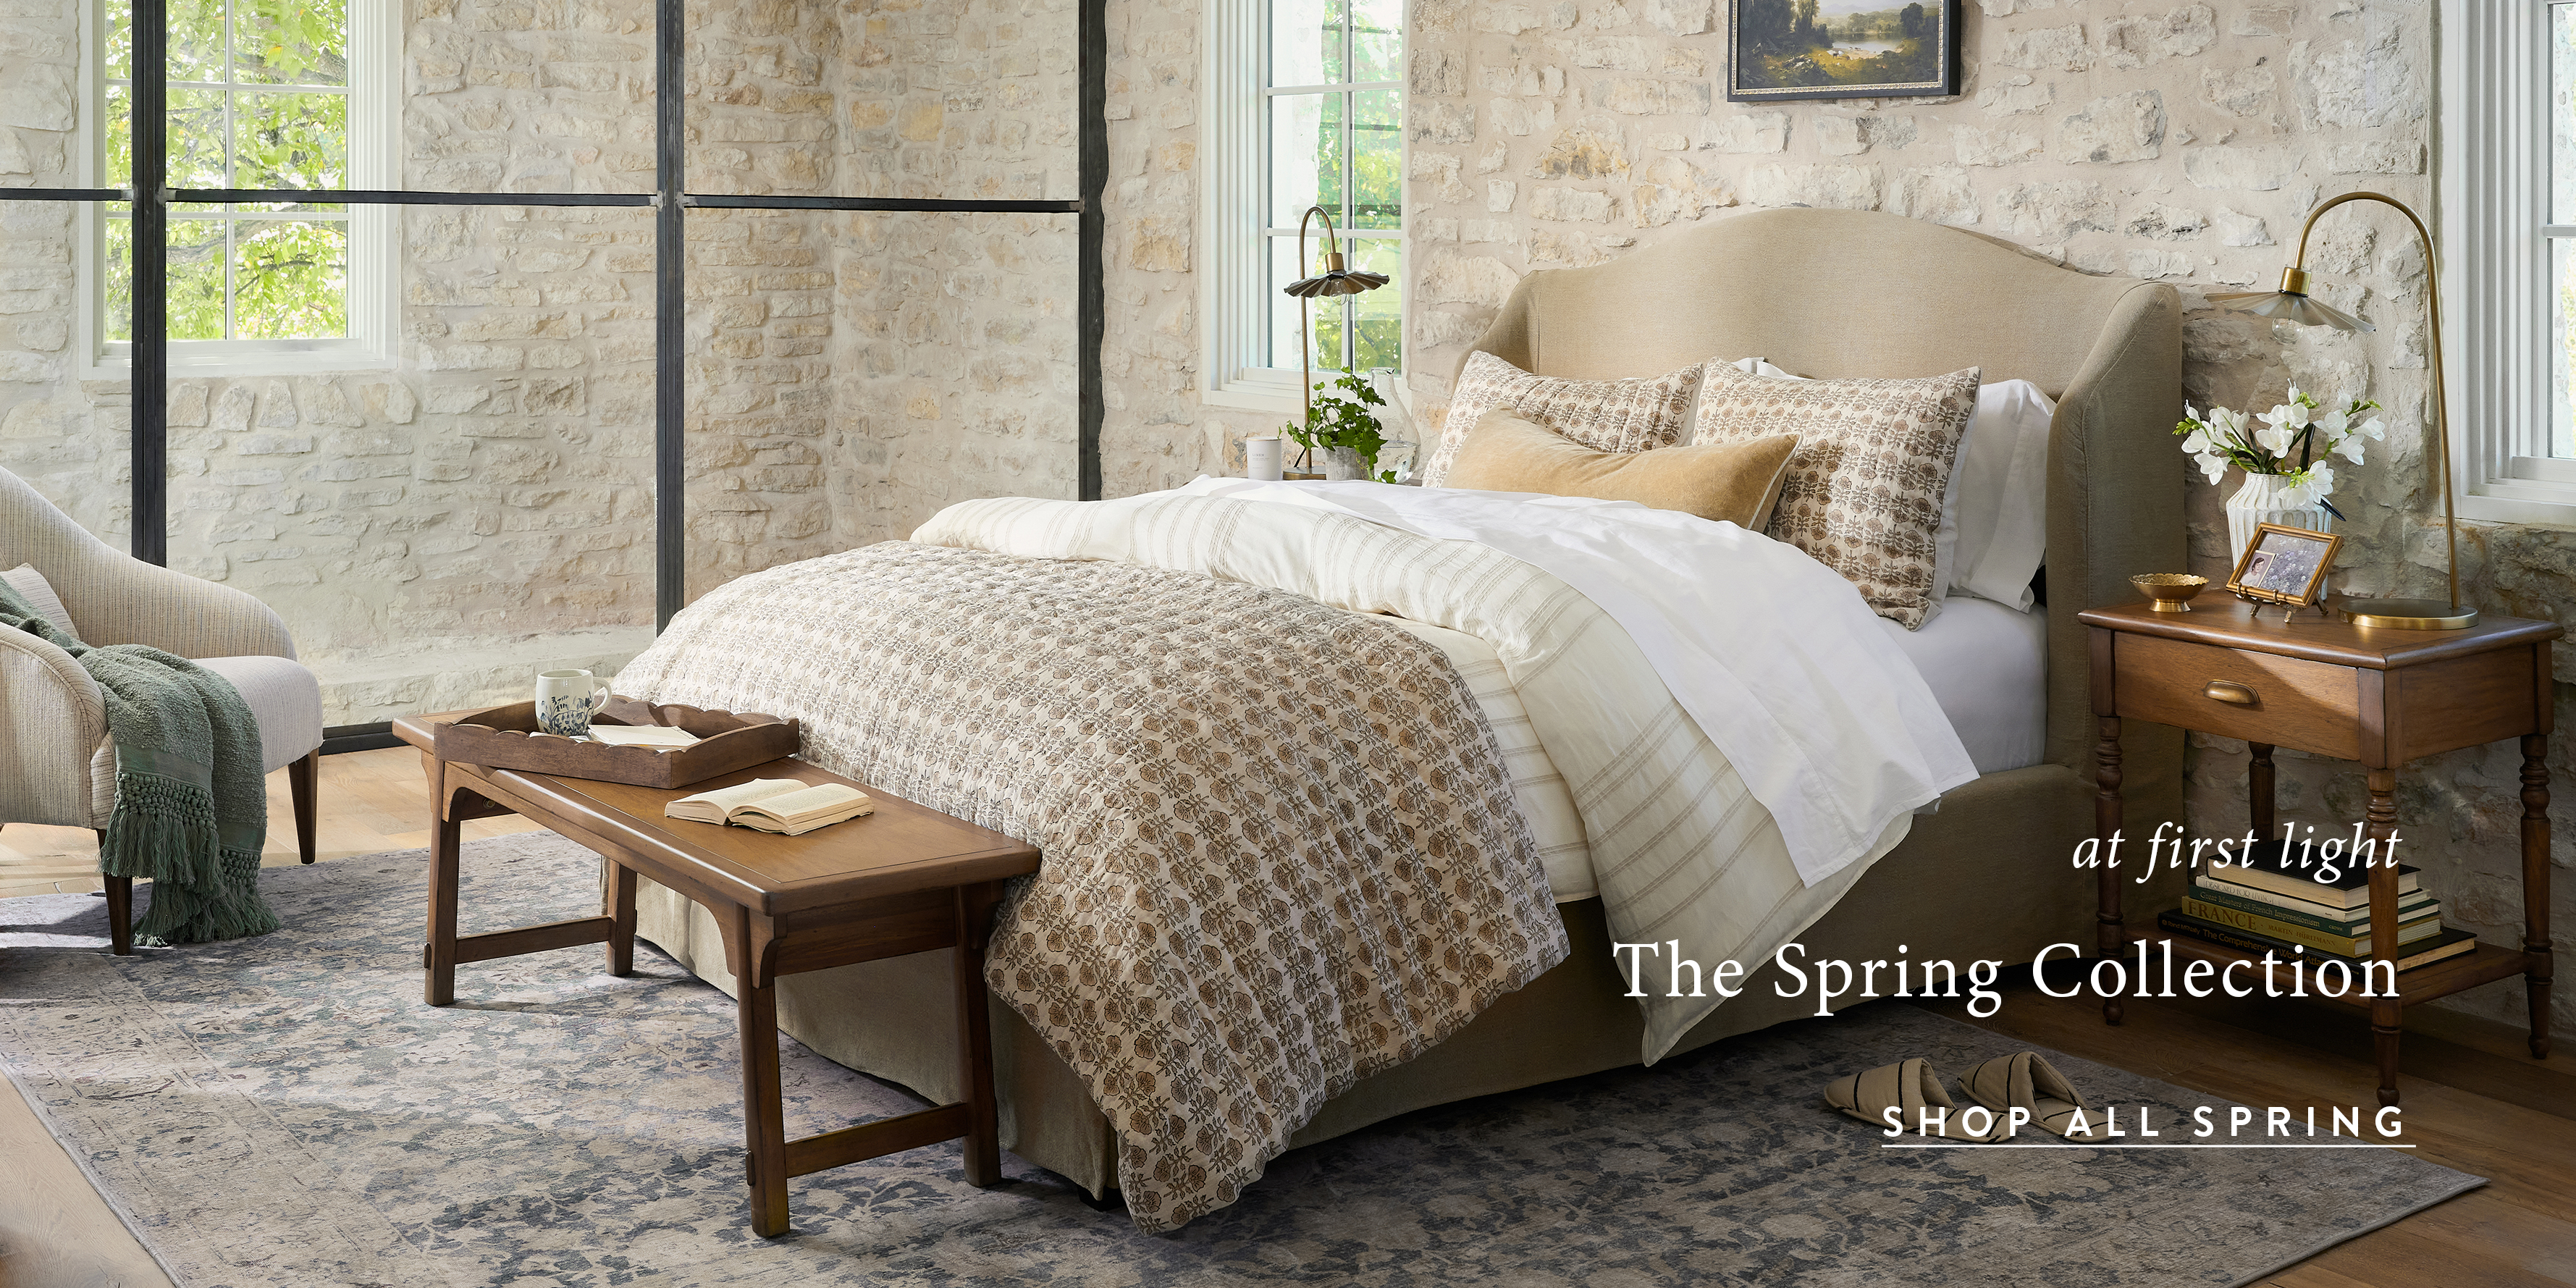 at first light - the spring collection - shop all spring. A bedroom is pictured